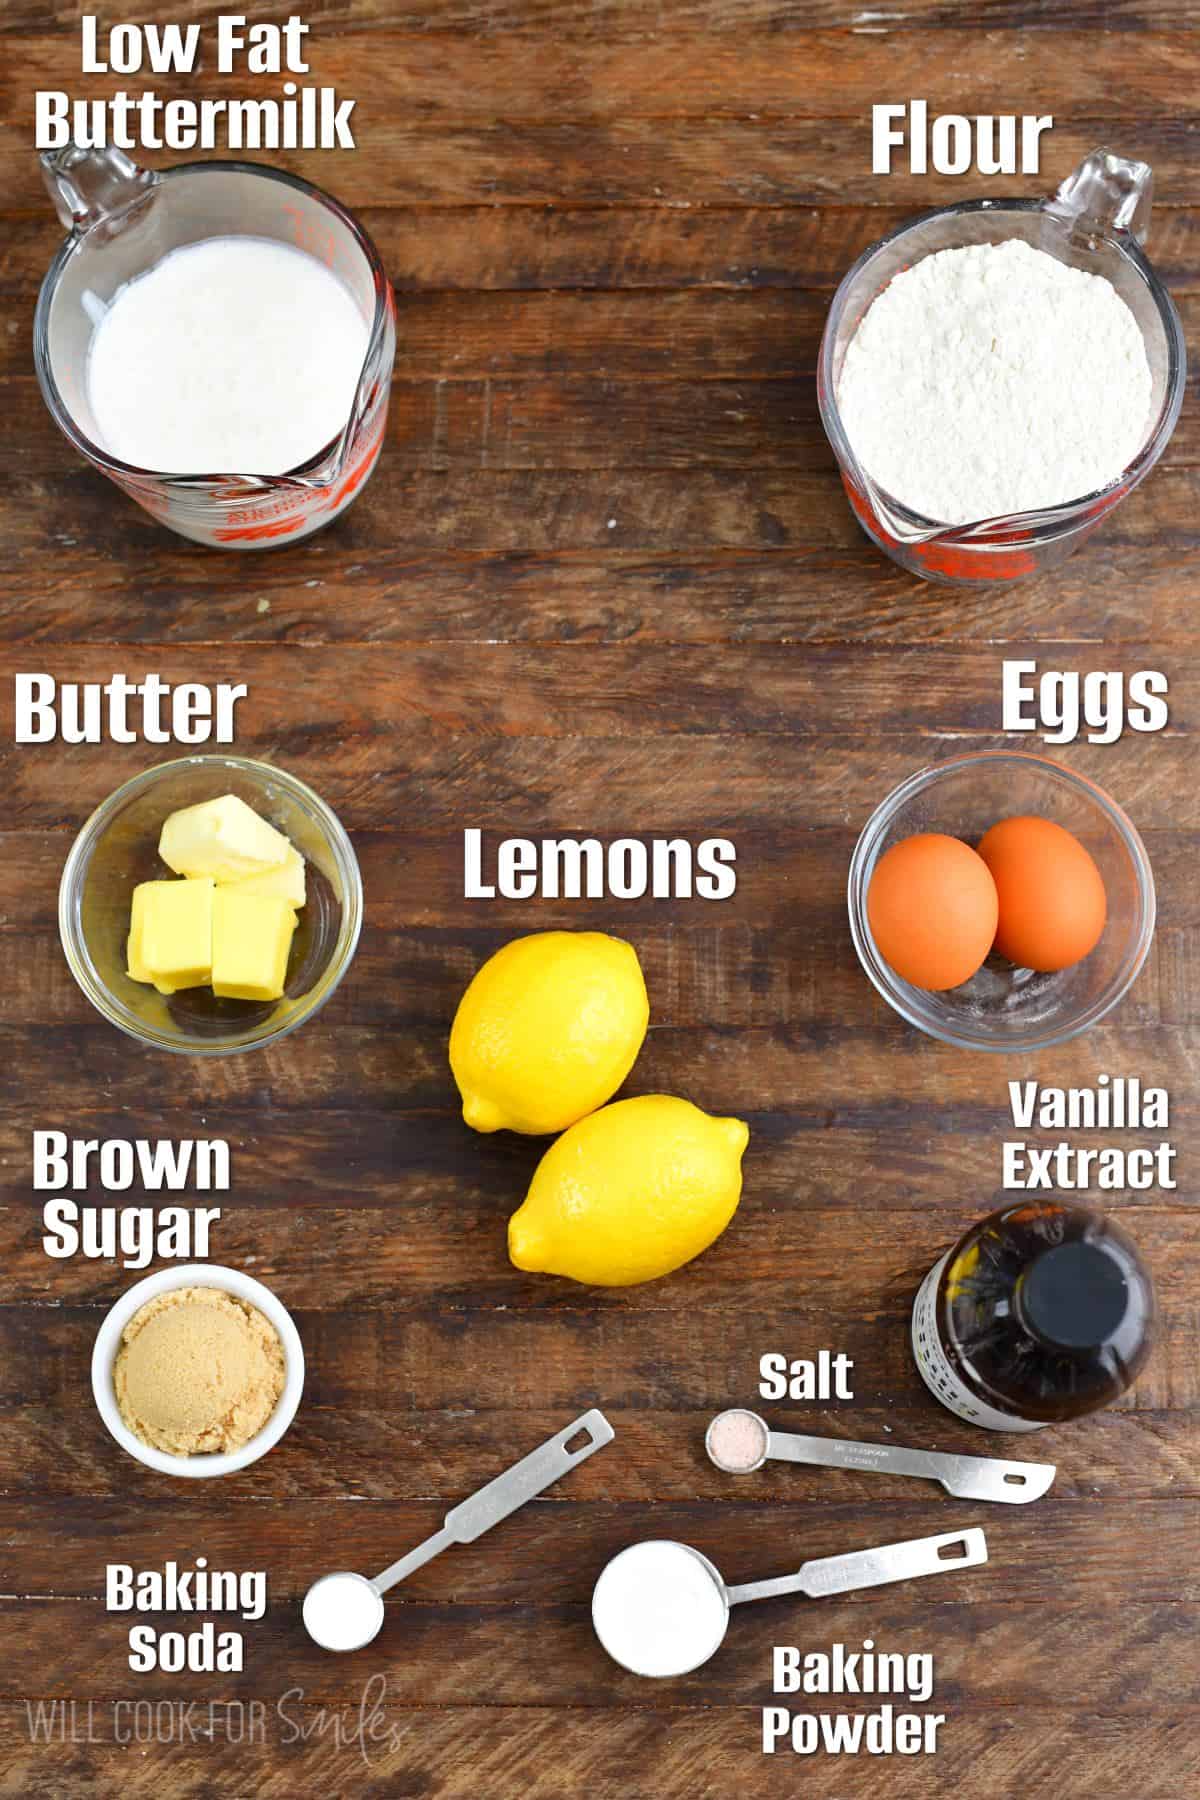 Labeled ingredients for lemon pancakes on a wood surface.